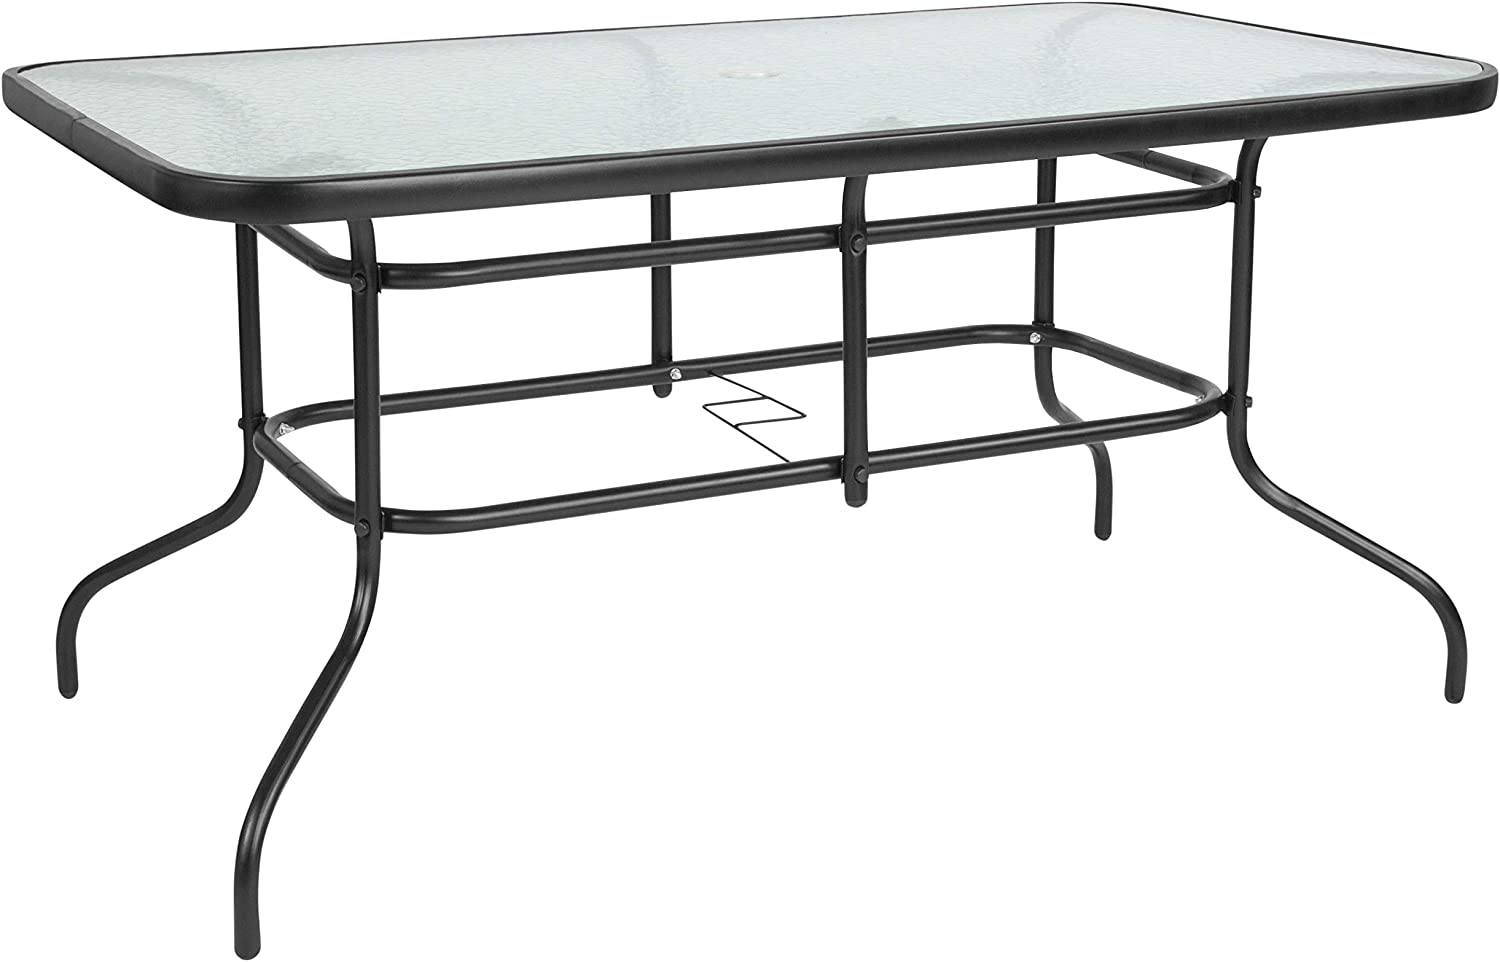 Flash Furniture 31.5&#34; x 55&#34; Rectangular Tempered Glass Metal Table with Umbrella Hole